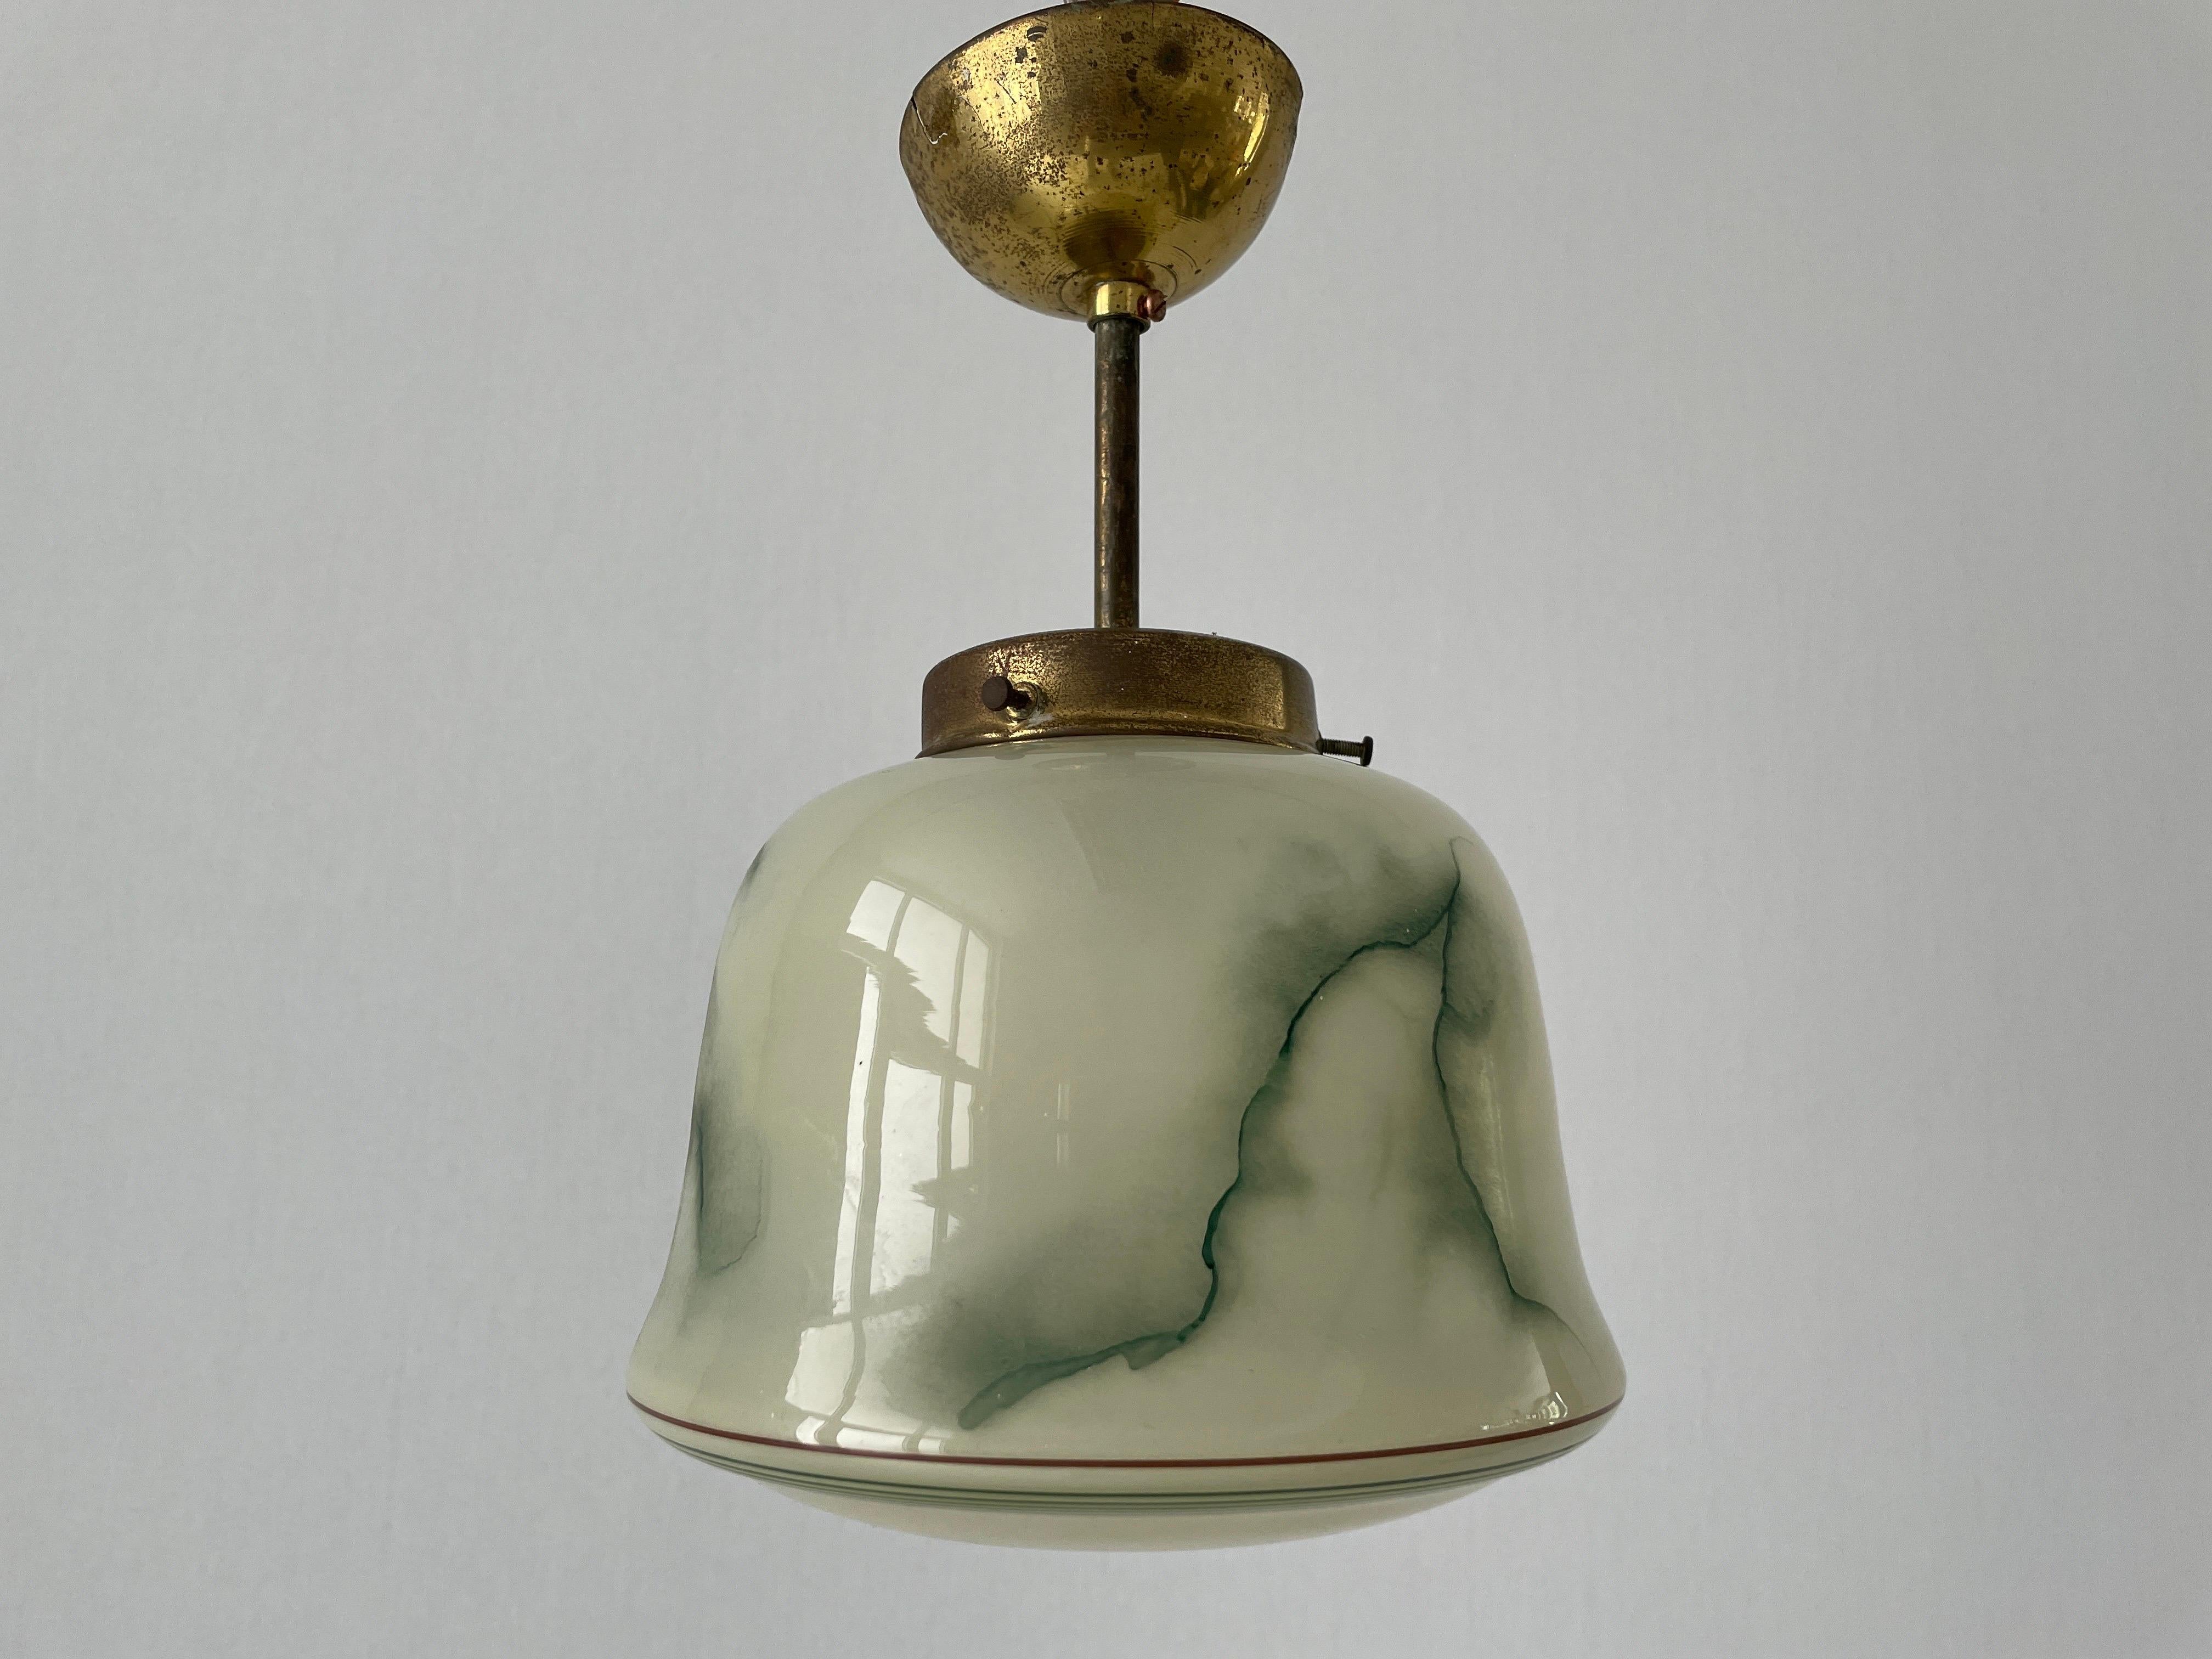 Green Glass Art Deco Small Ceiling Lamp, 1950s, Germany

This lamp works with E27 light bulb.

Measurements: 
Height: 30 cm
Shade diameter and height: 19 cm and 17 cm

